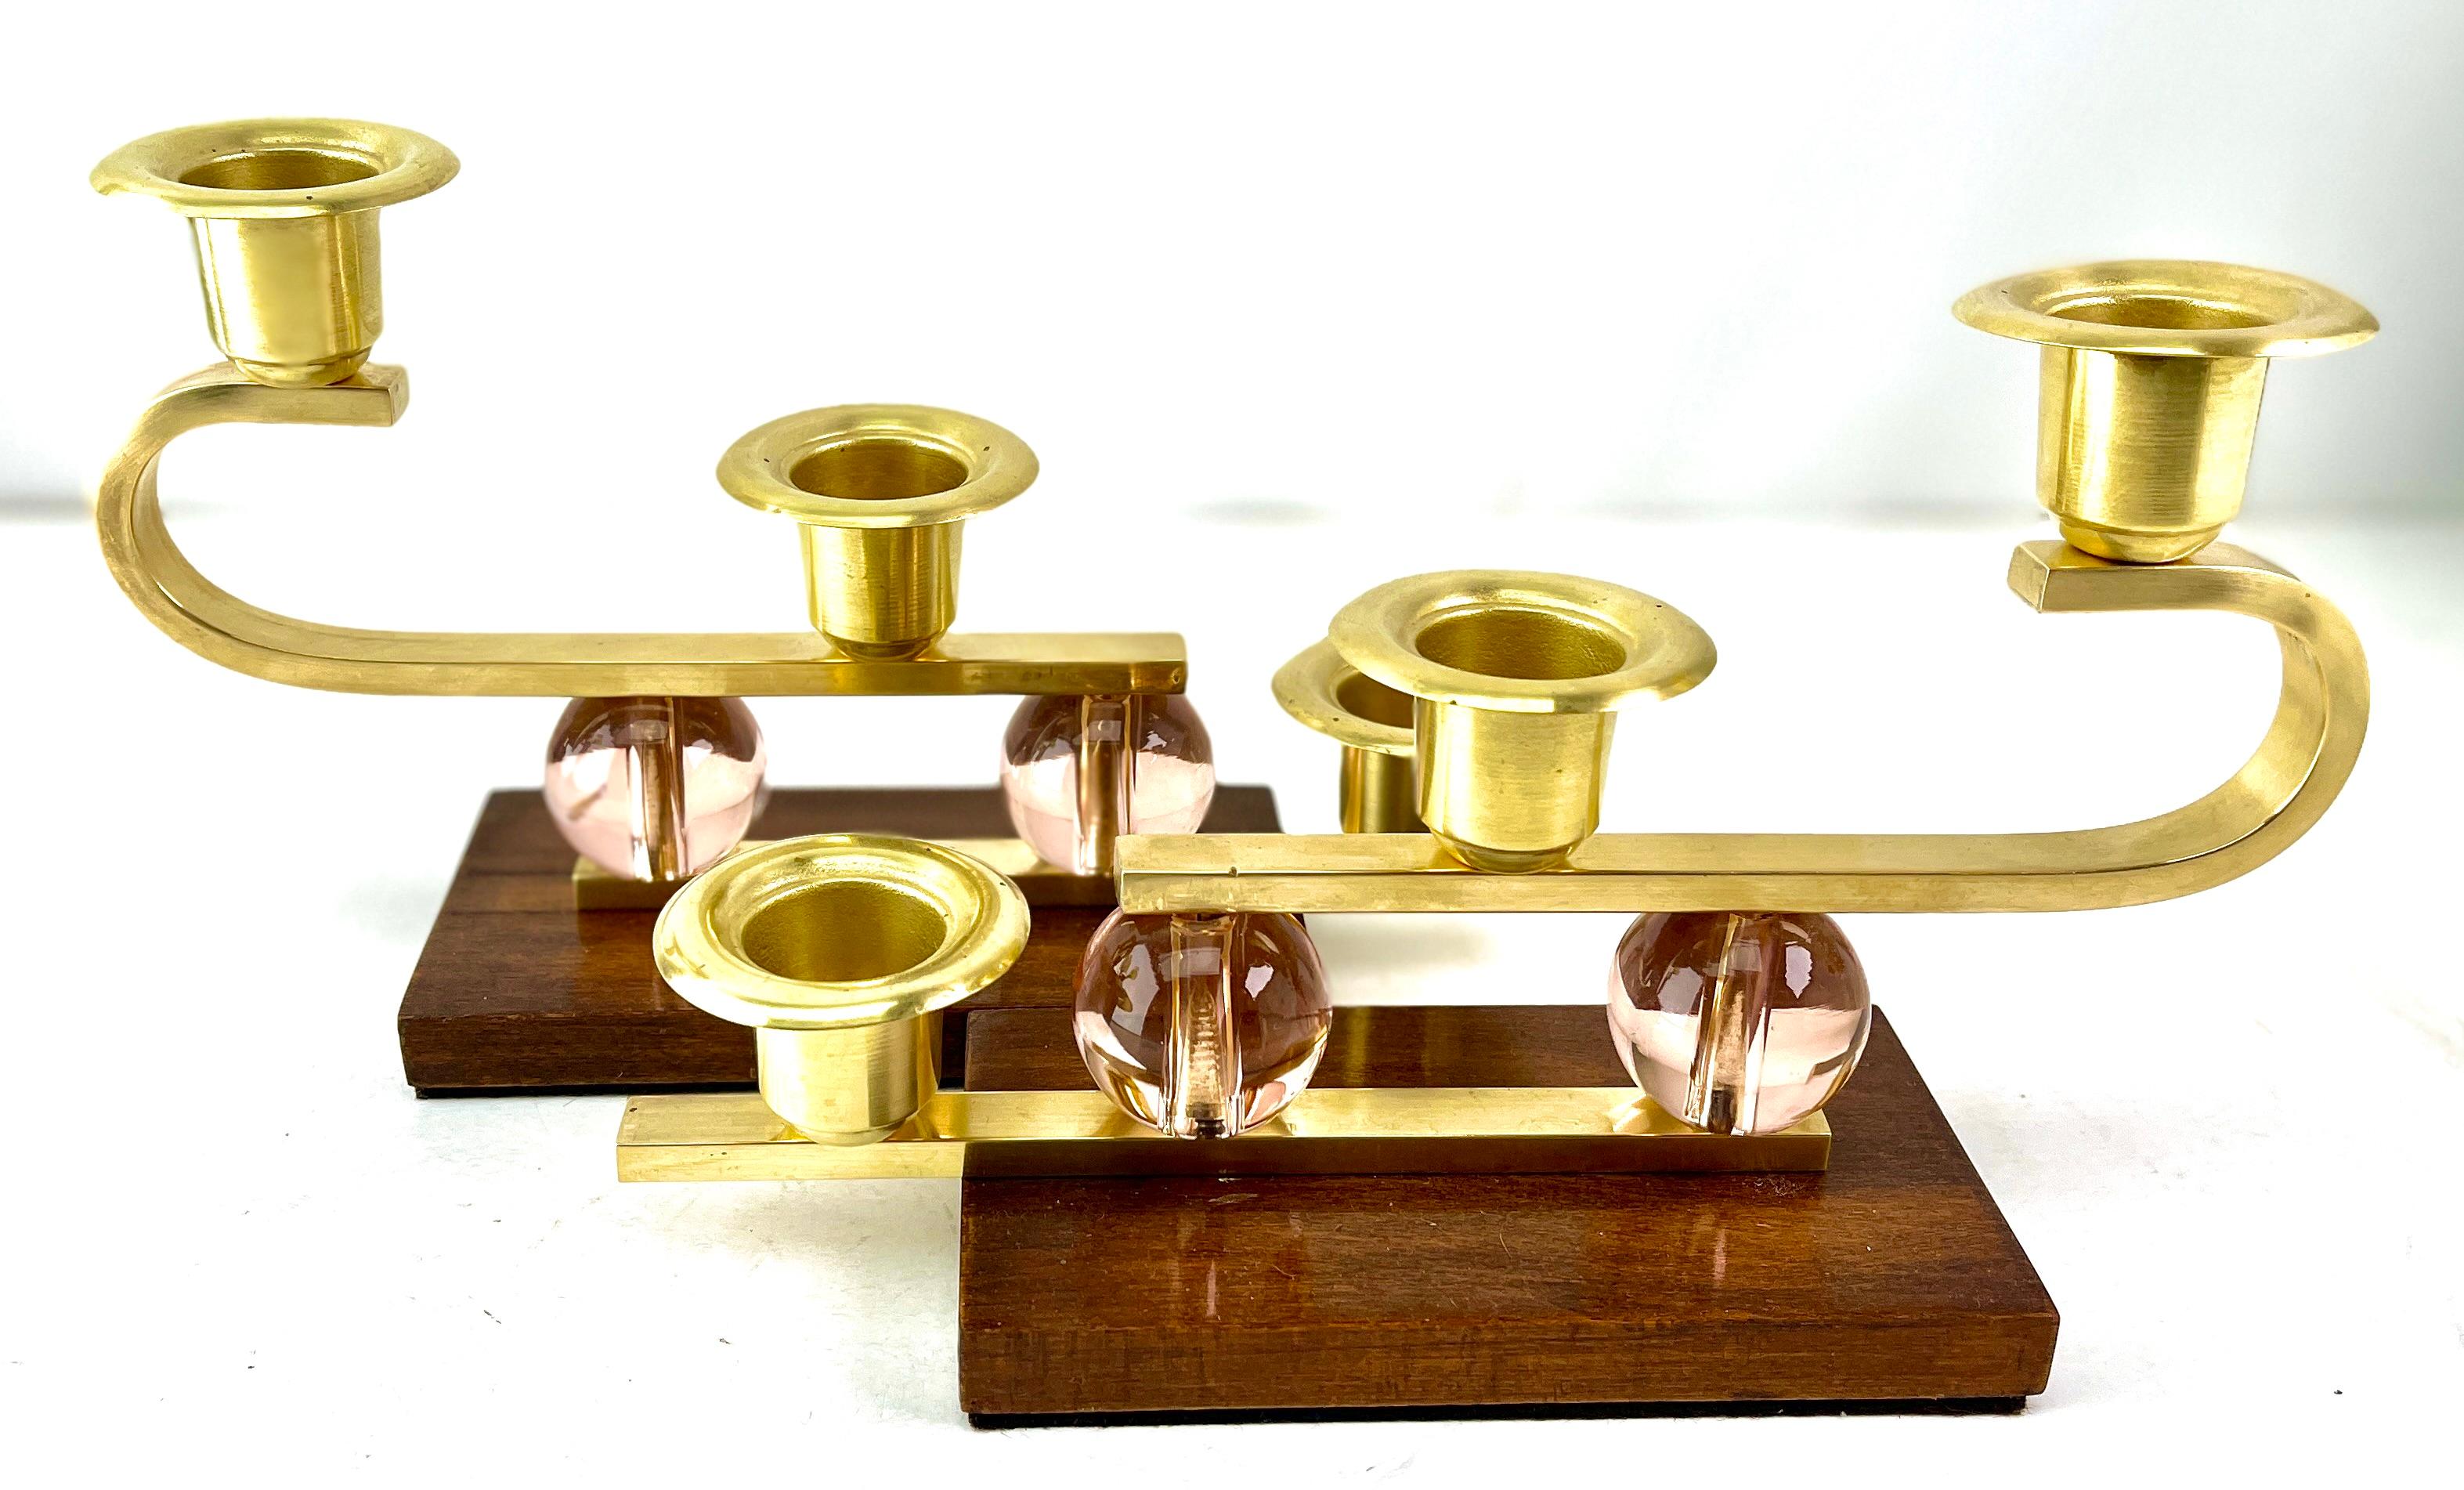 Hand-Crafted Art Deco Wooden Base and Brass Candlestick whit Glass Details, 1930s For Sale